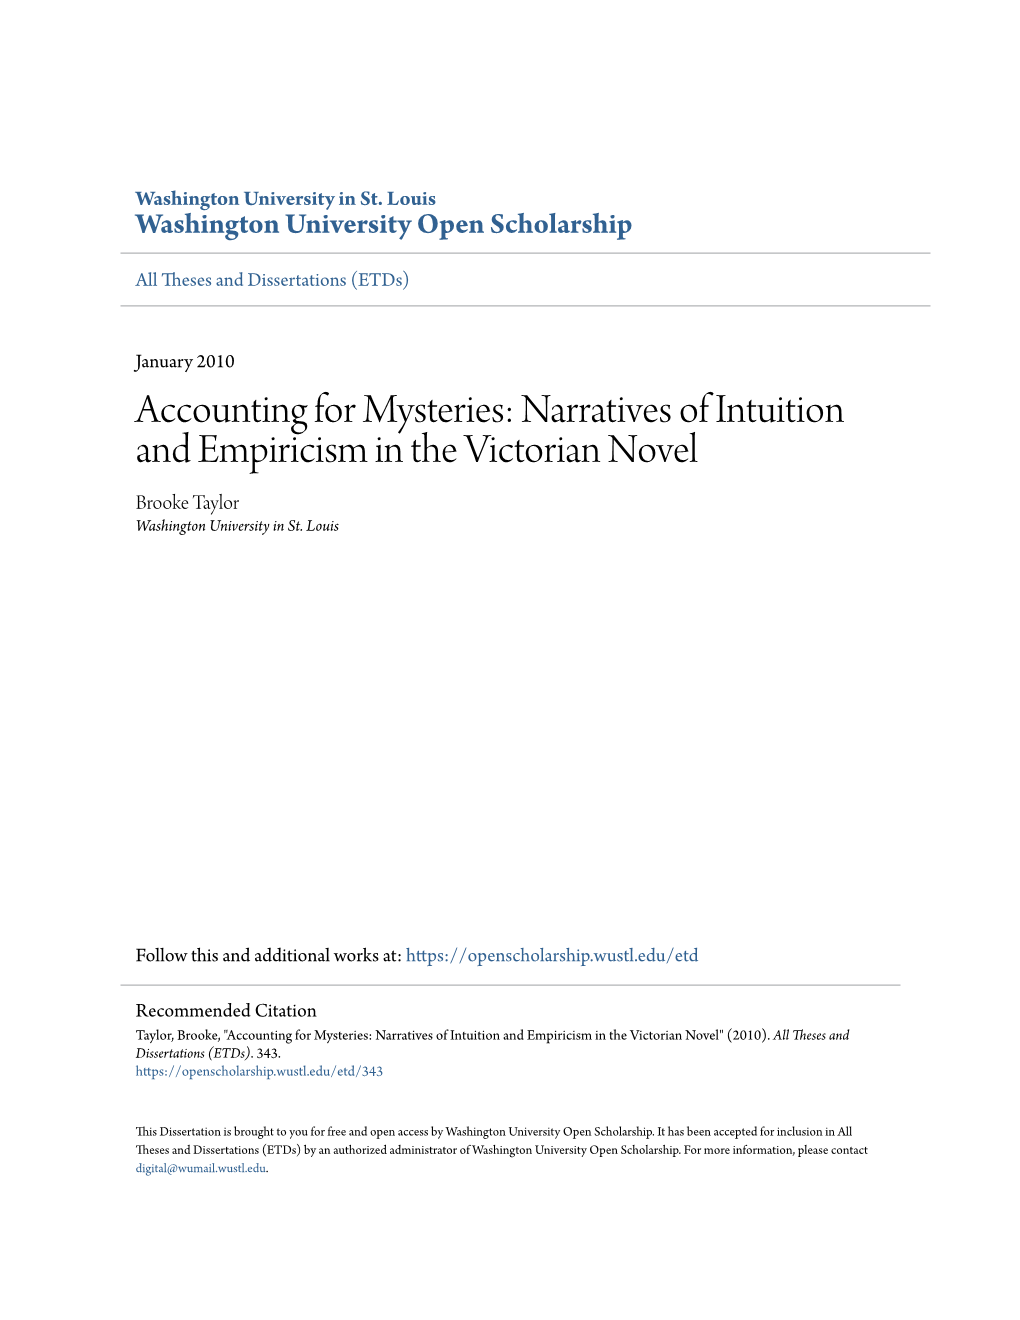 Narratives of Intuition and Empiricism in the Victorian Novel Brooke Taylor Washington University in St